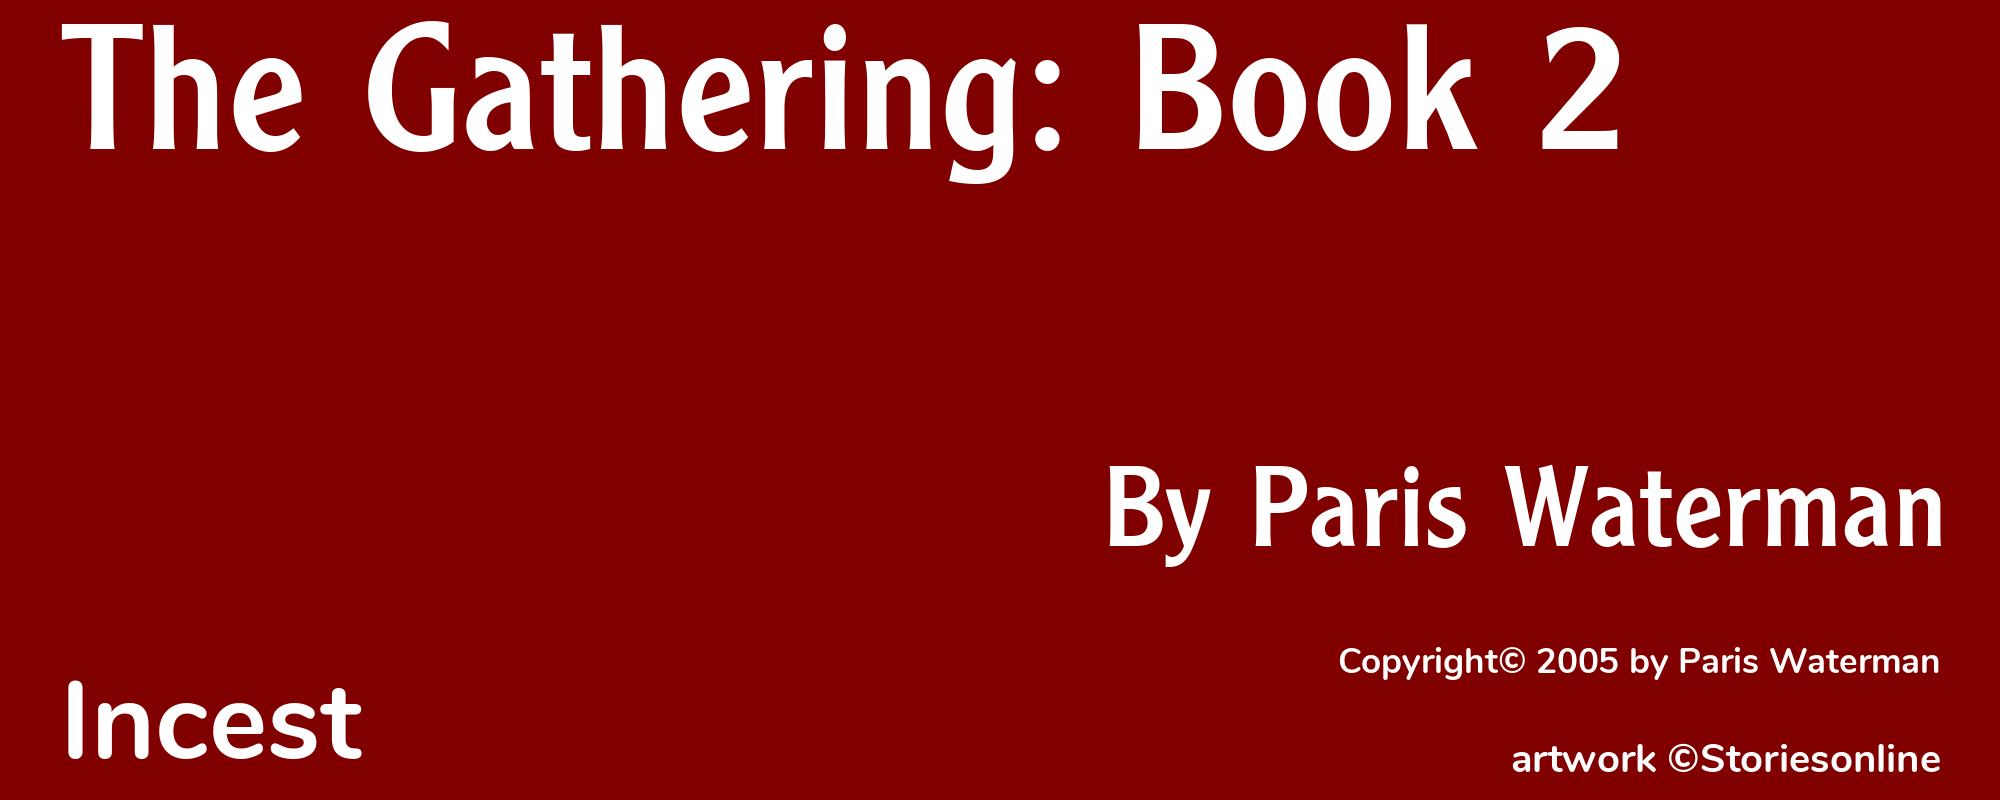 The Gathering: Book 2 - Cover